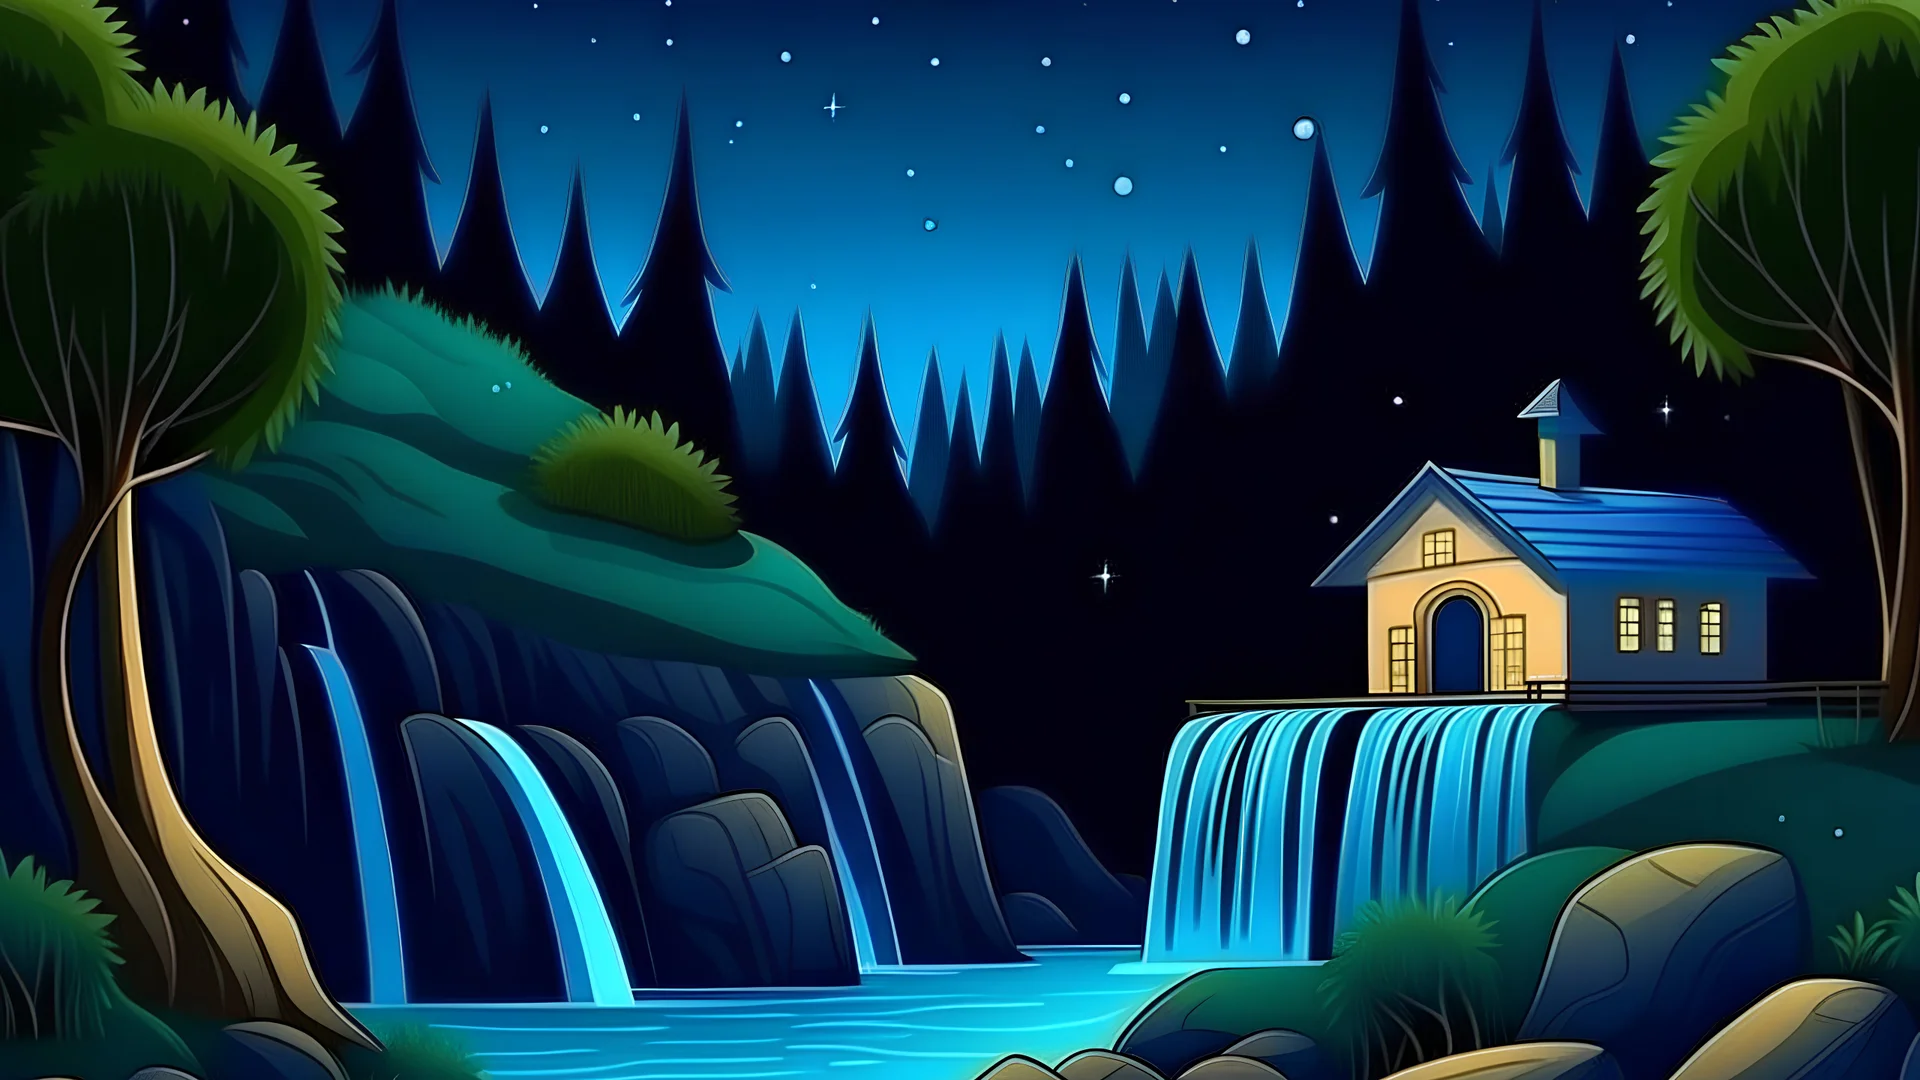 There is a small house near a waterfall in the starry night sky.